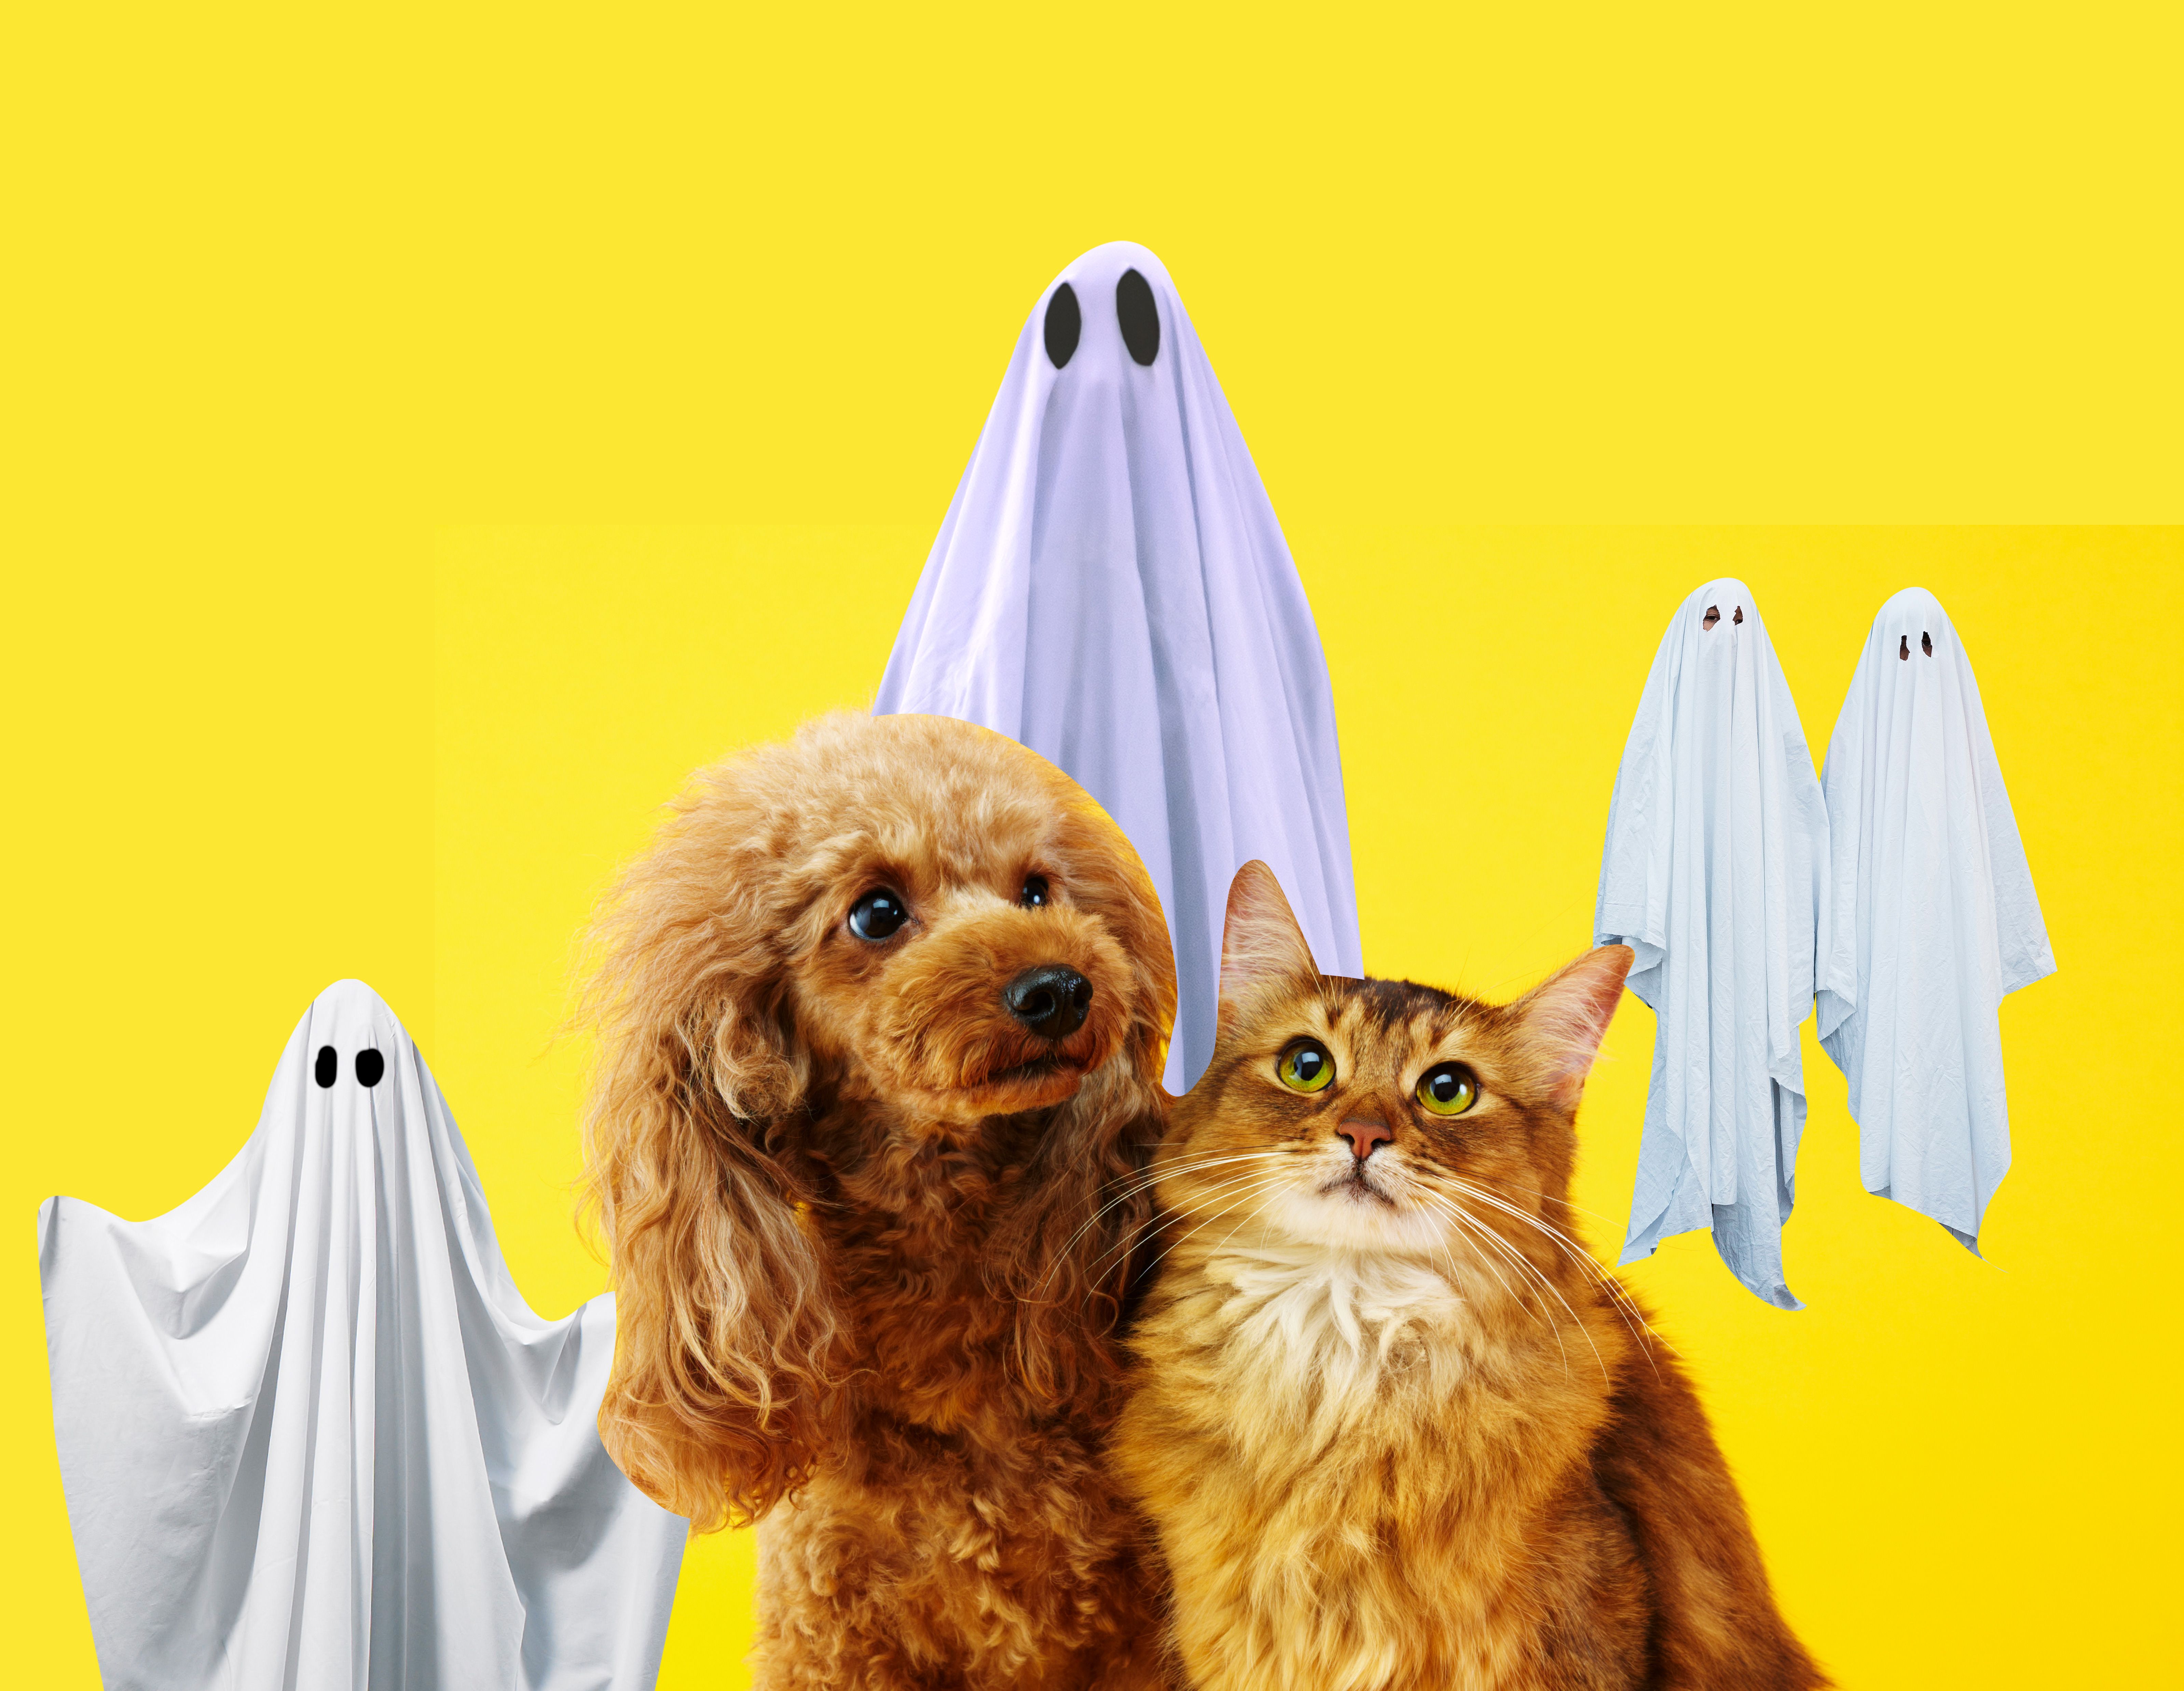 Why people think they see ghosts - Vox